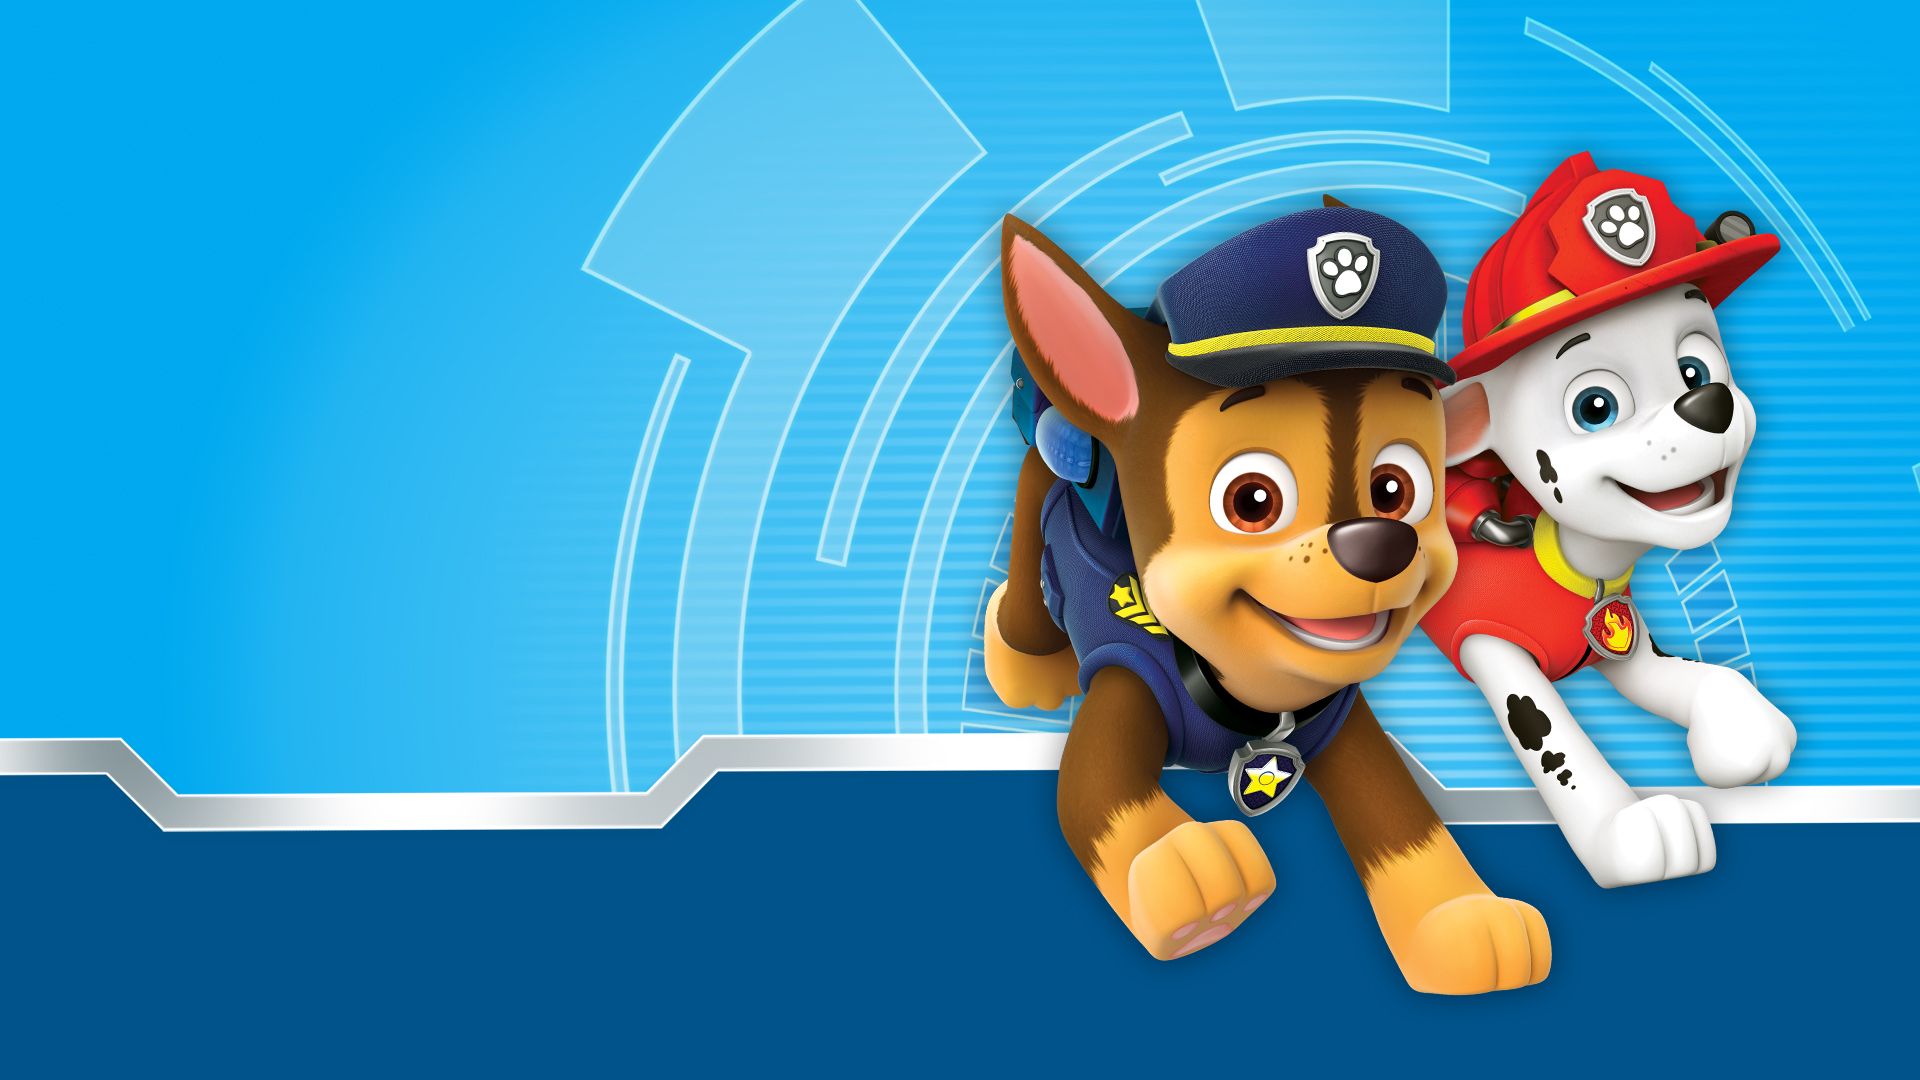 Chase Paw Patrol Wallpapers - Wallpaper Cave